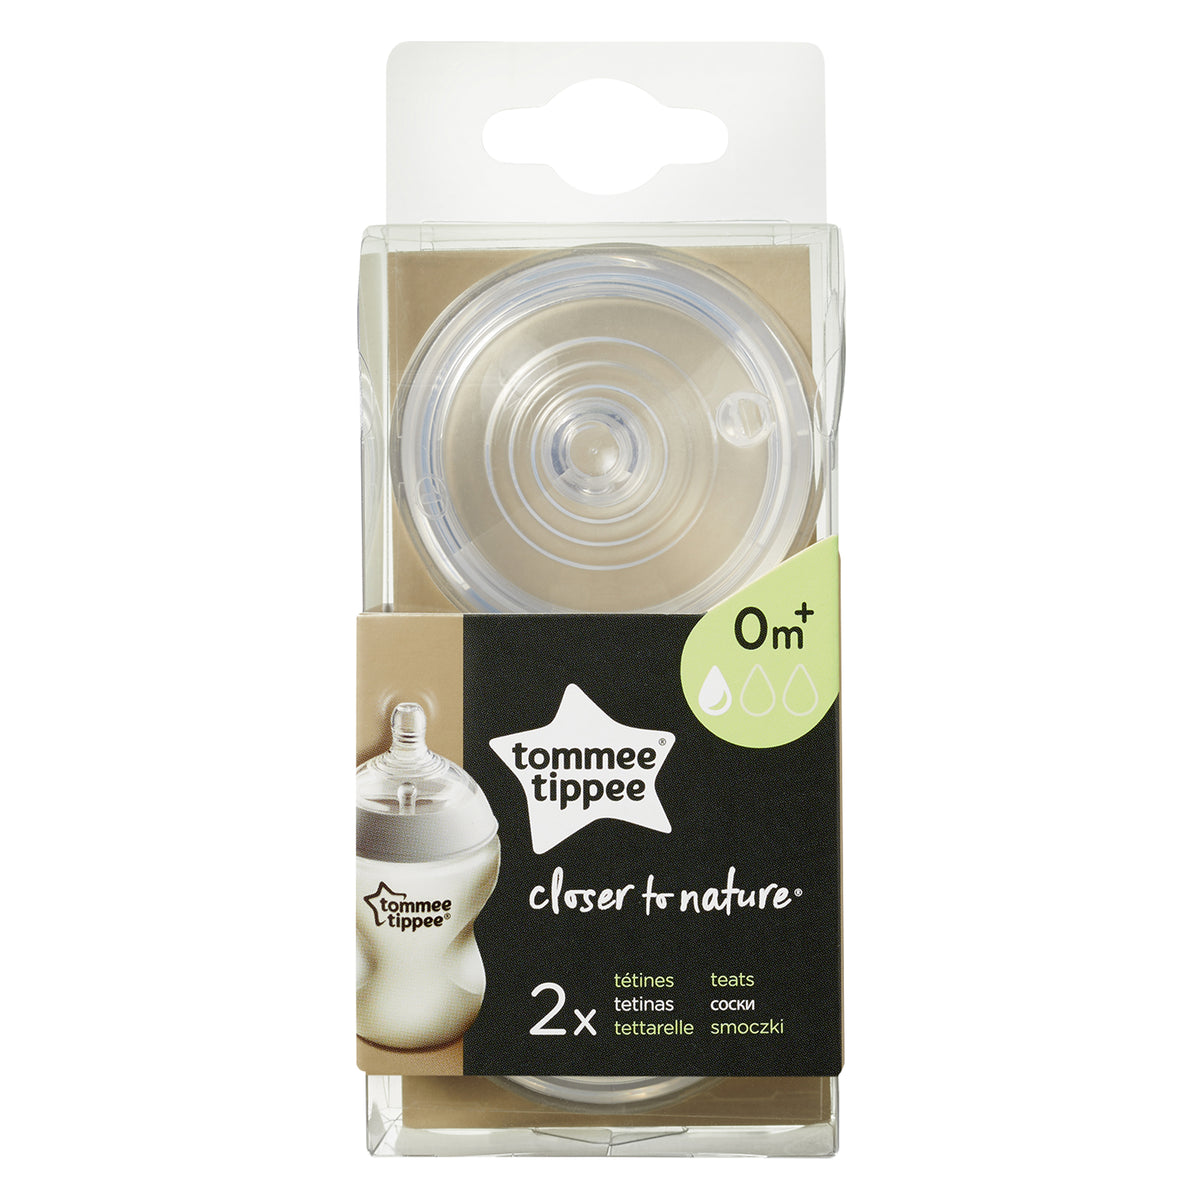 Tommee Tippee Closer to Nature PK of 2 teats- Slow flow